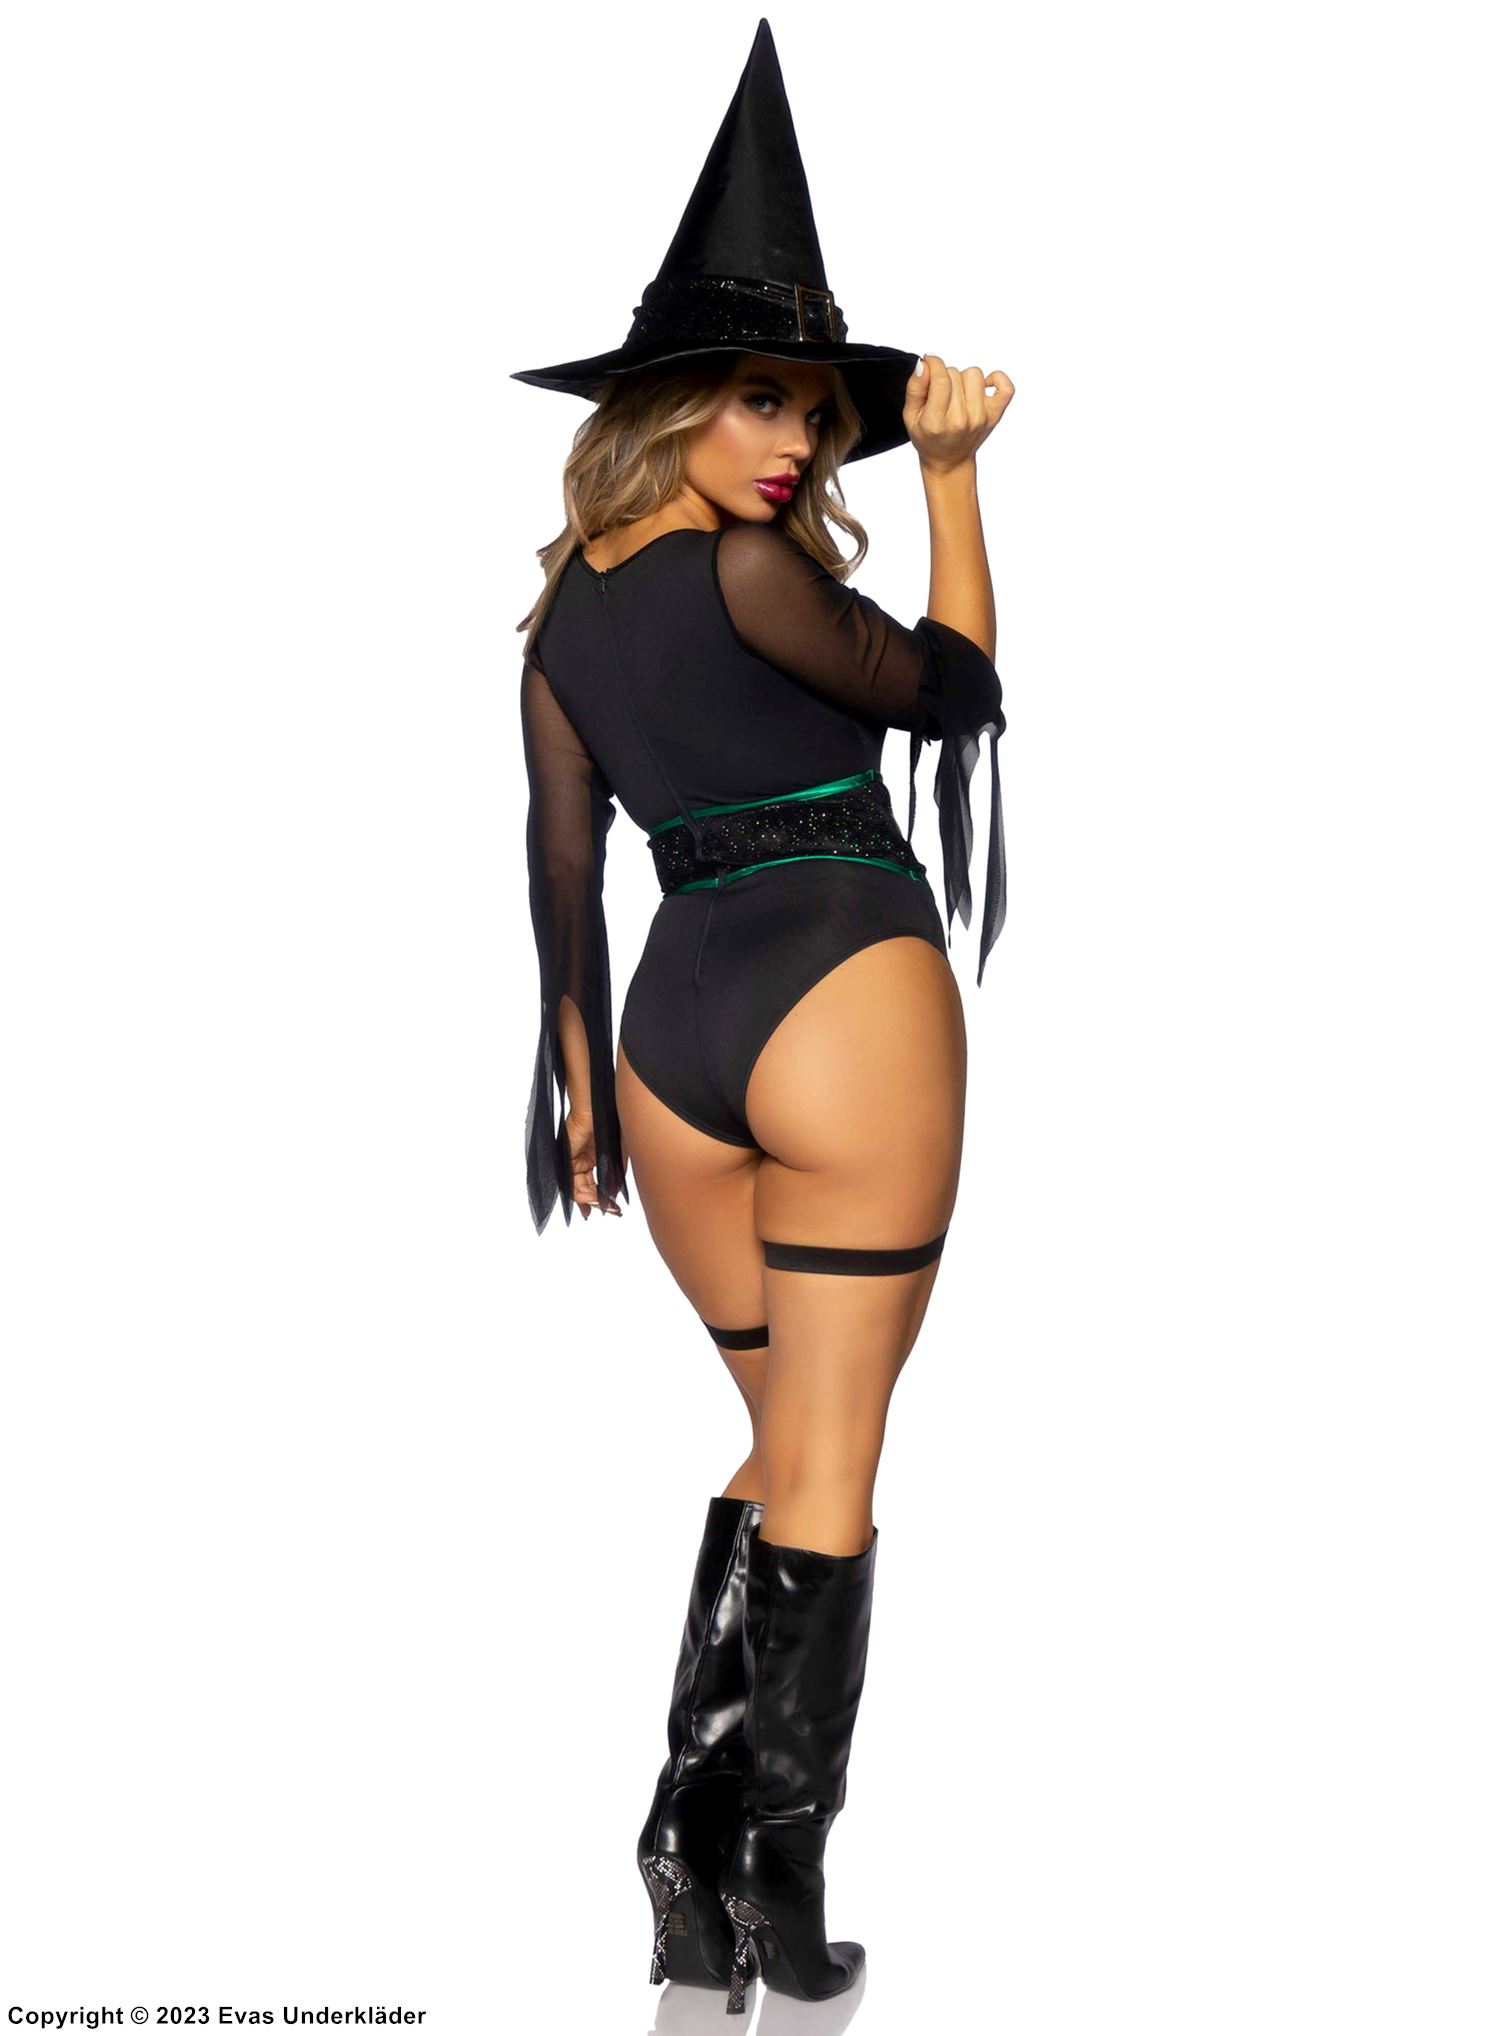 Witch, teddy costume, crossing straps, tattered sleeves